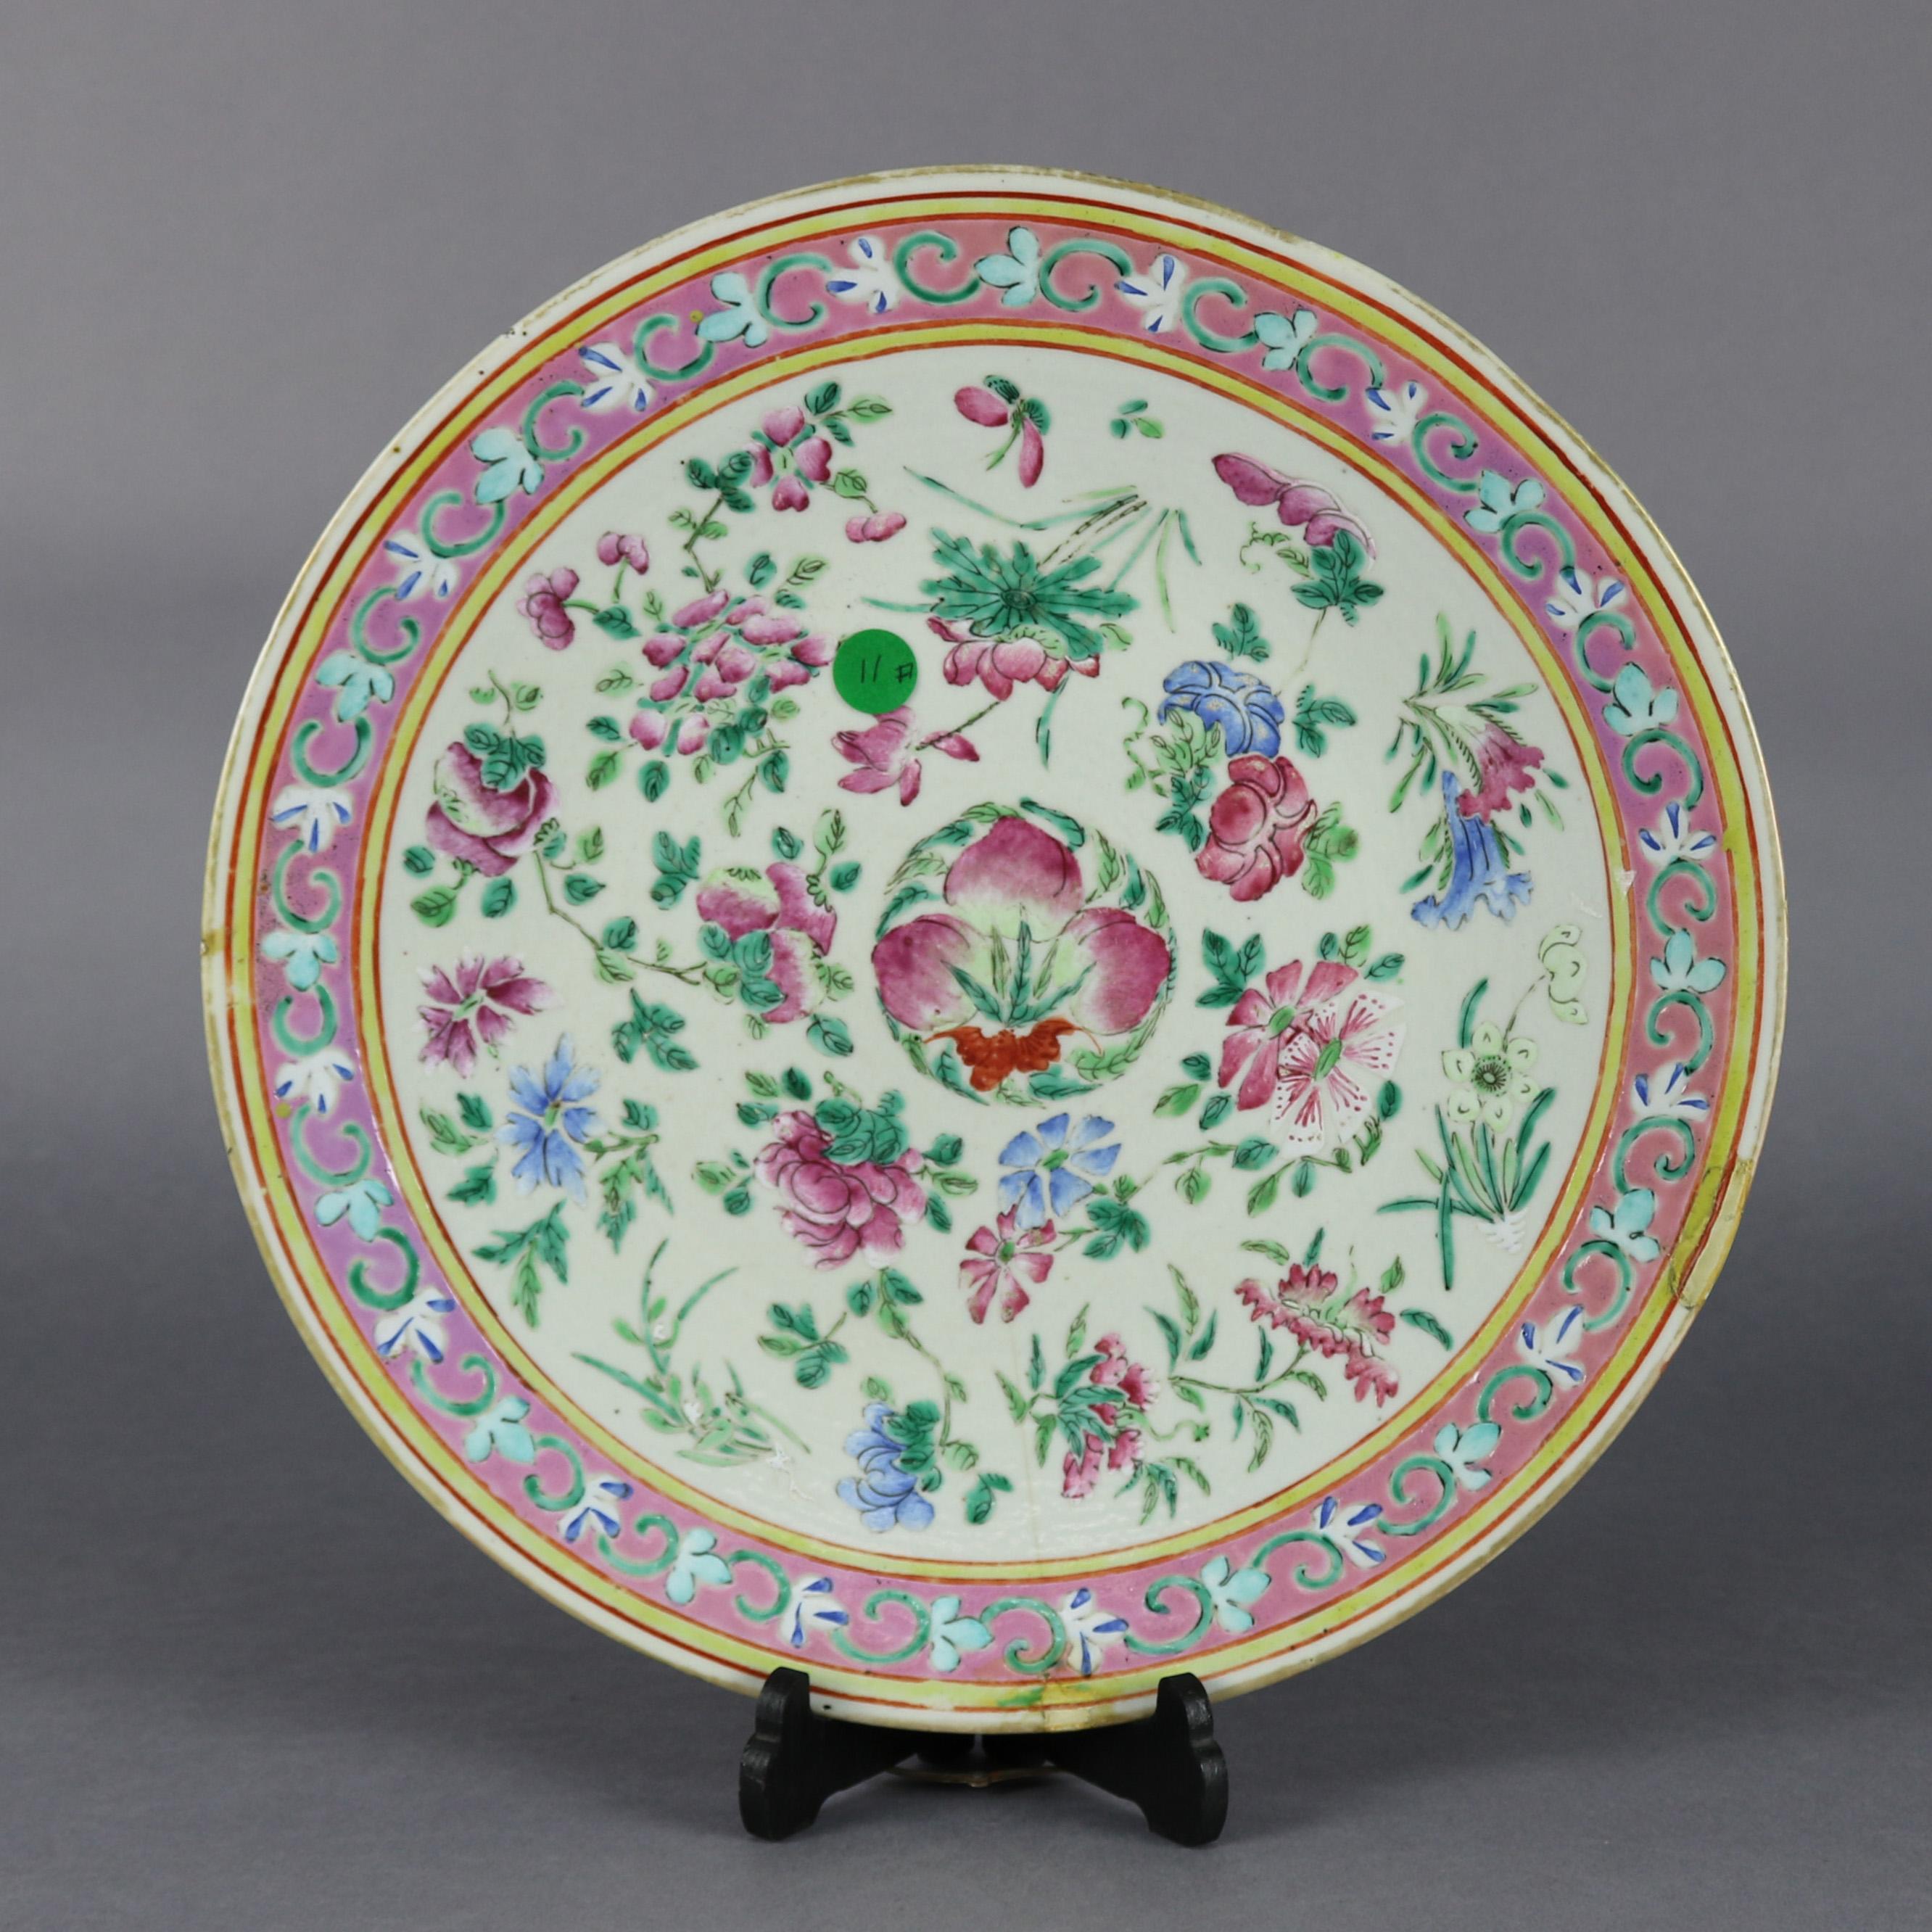 Ceramic Antique Chinese Export Hand Painted Porcelain Floral Charger, Early 20th Century